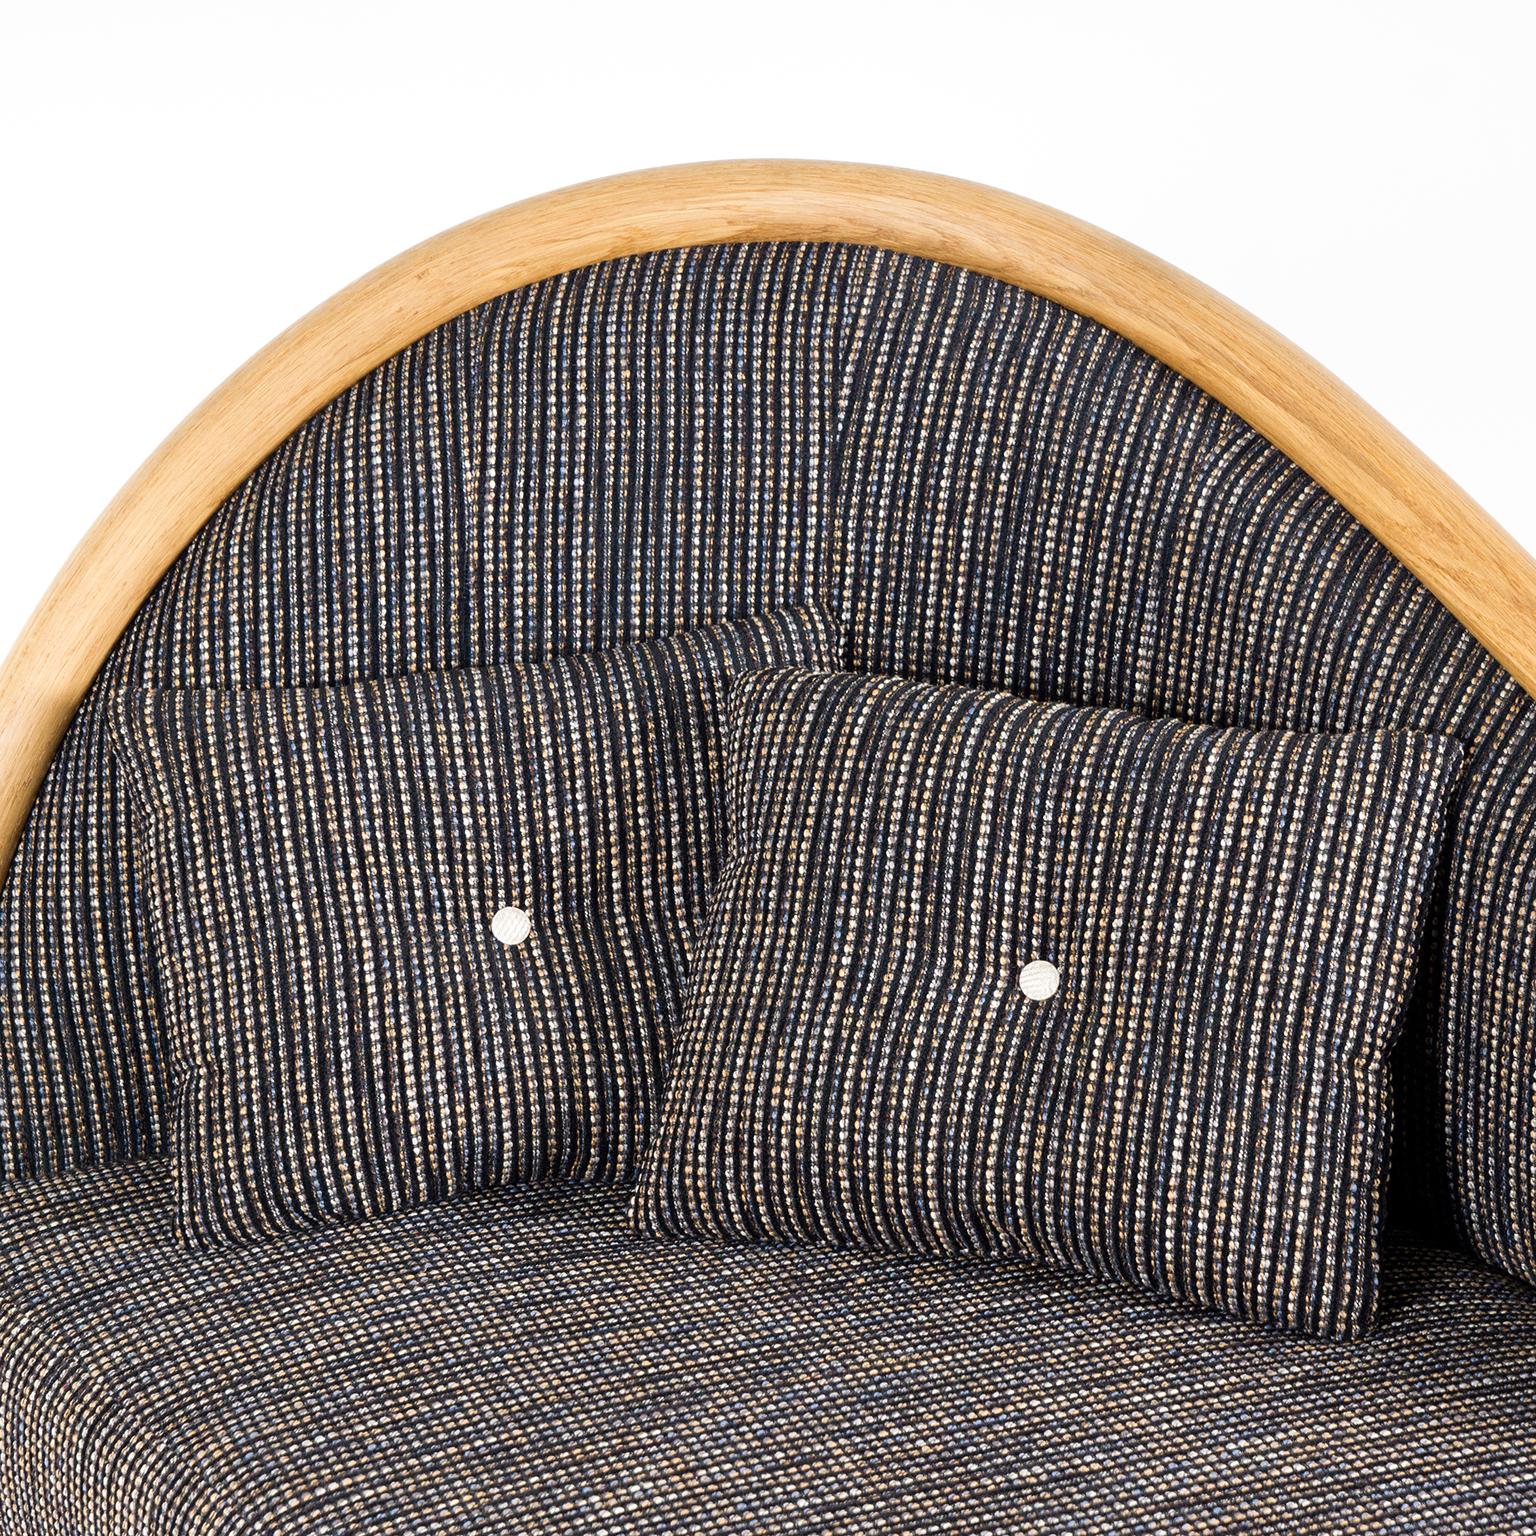 Contemporary Curved Chaise Longue made in Oak with Grey Fabric In New Condition For Sale In Bosham, GB